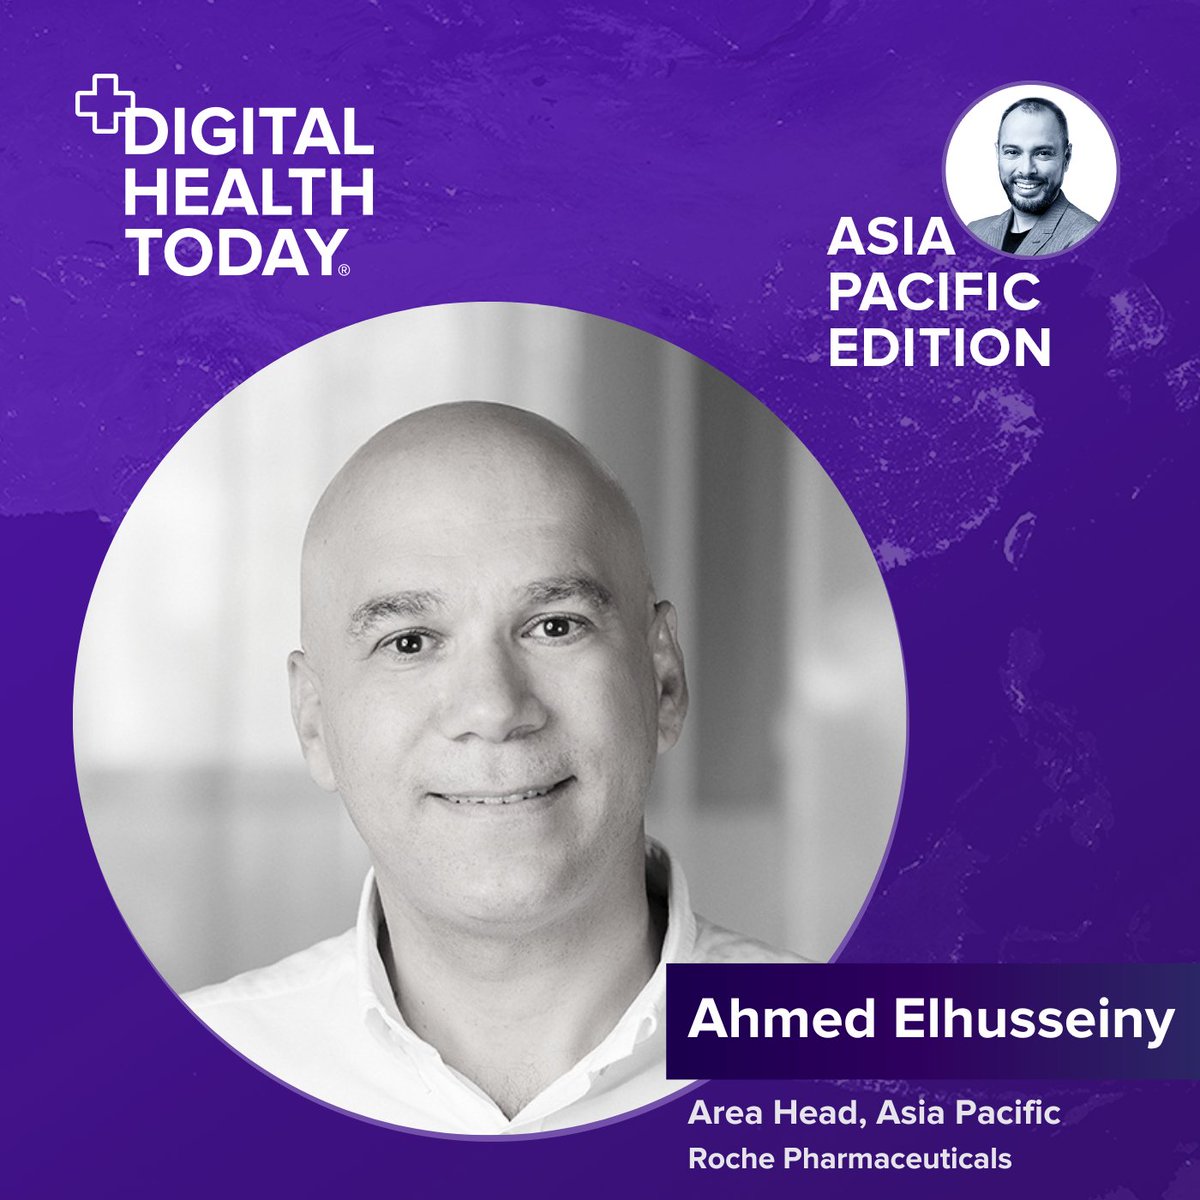 Tune in to hear Antonio Estrella speak with Ahmed Elhusseiny, the Area Head for @Roche Pharmaceuticals in Asia Pacific to discuss how a global multinational can drive change. Listen now: listen.podcasts.health/xNIkbq0R #personalisedhealth #healthequity #digitalhealth #health